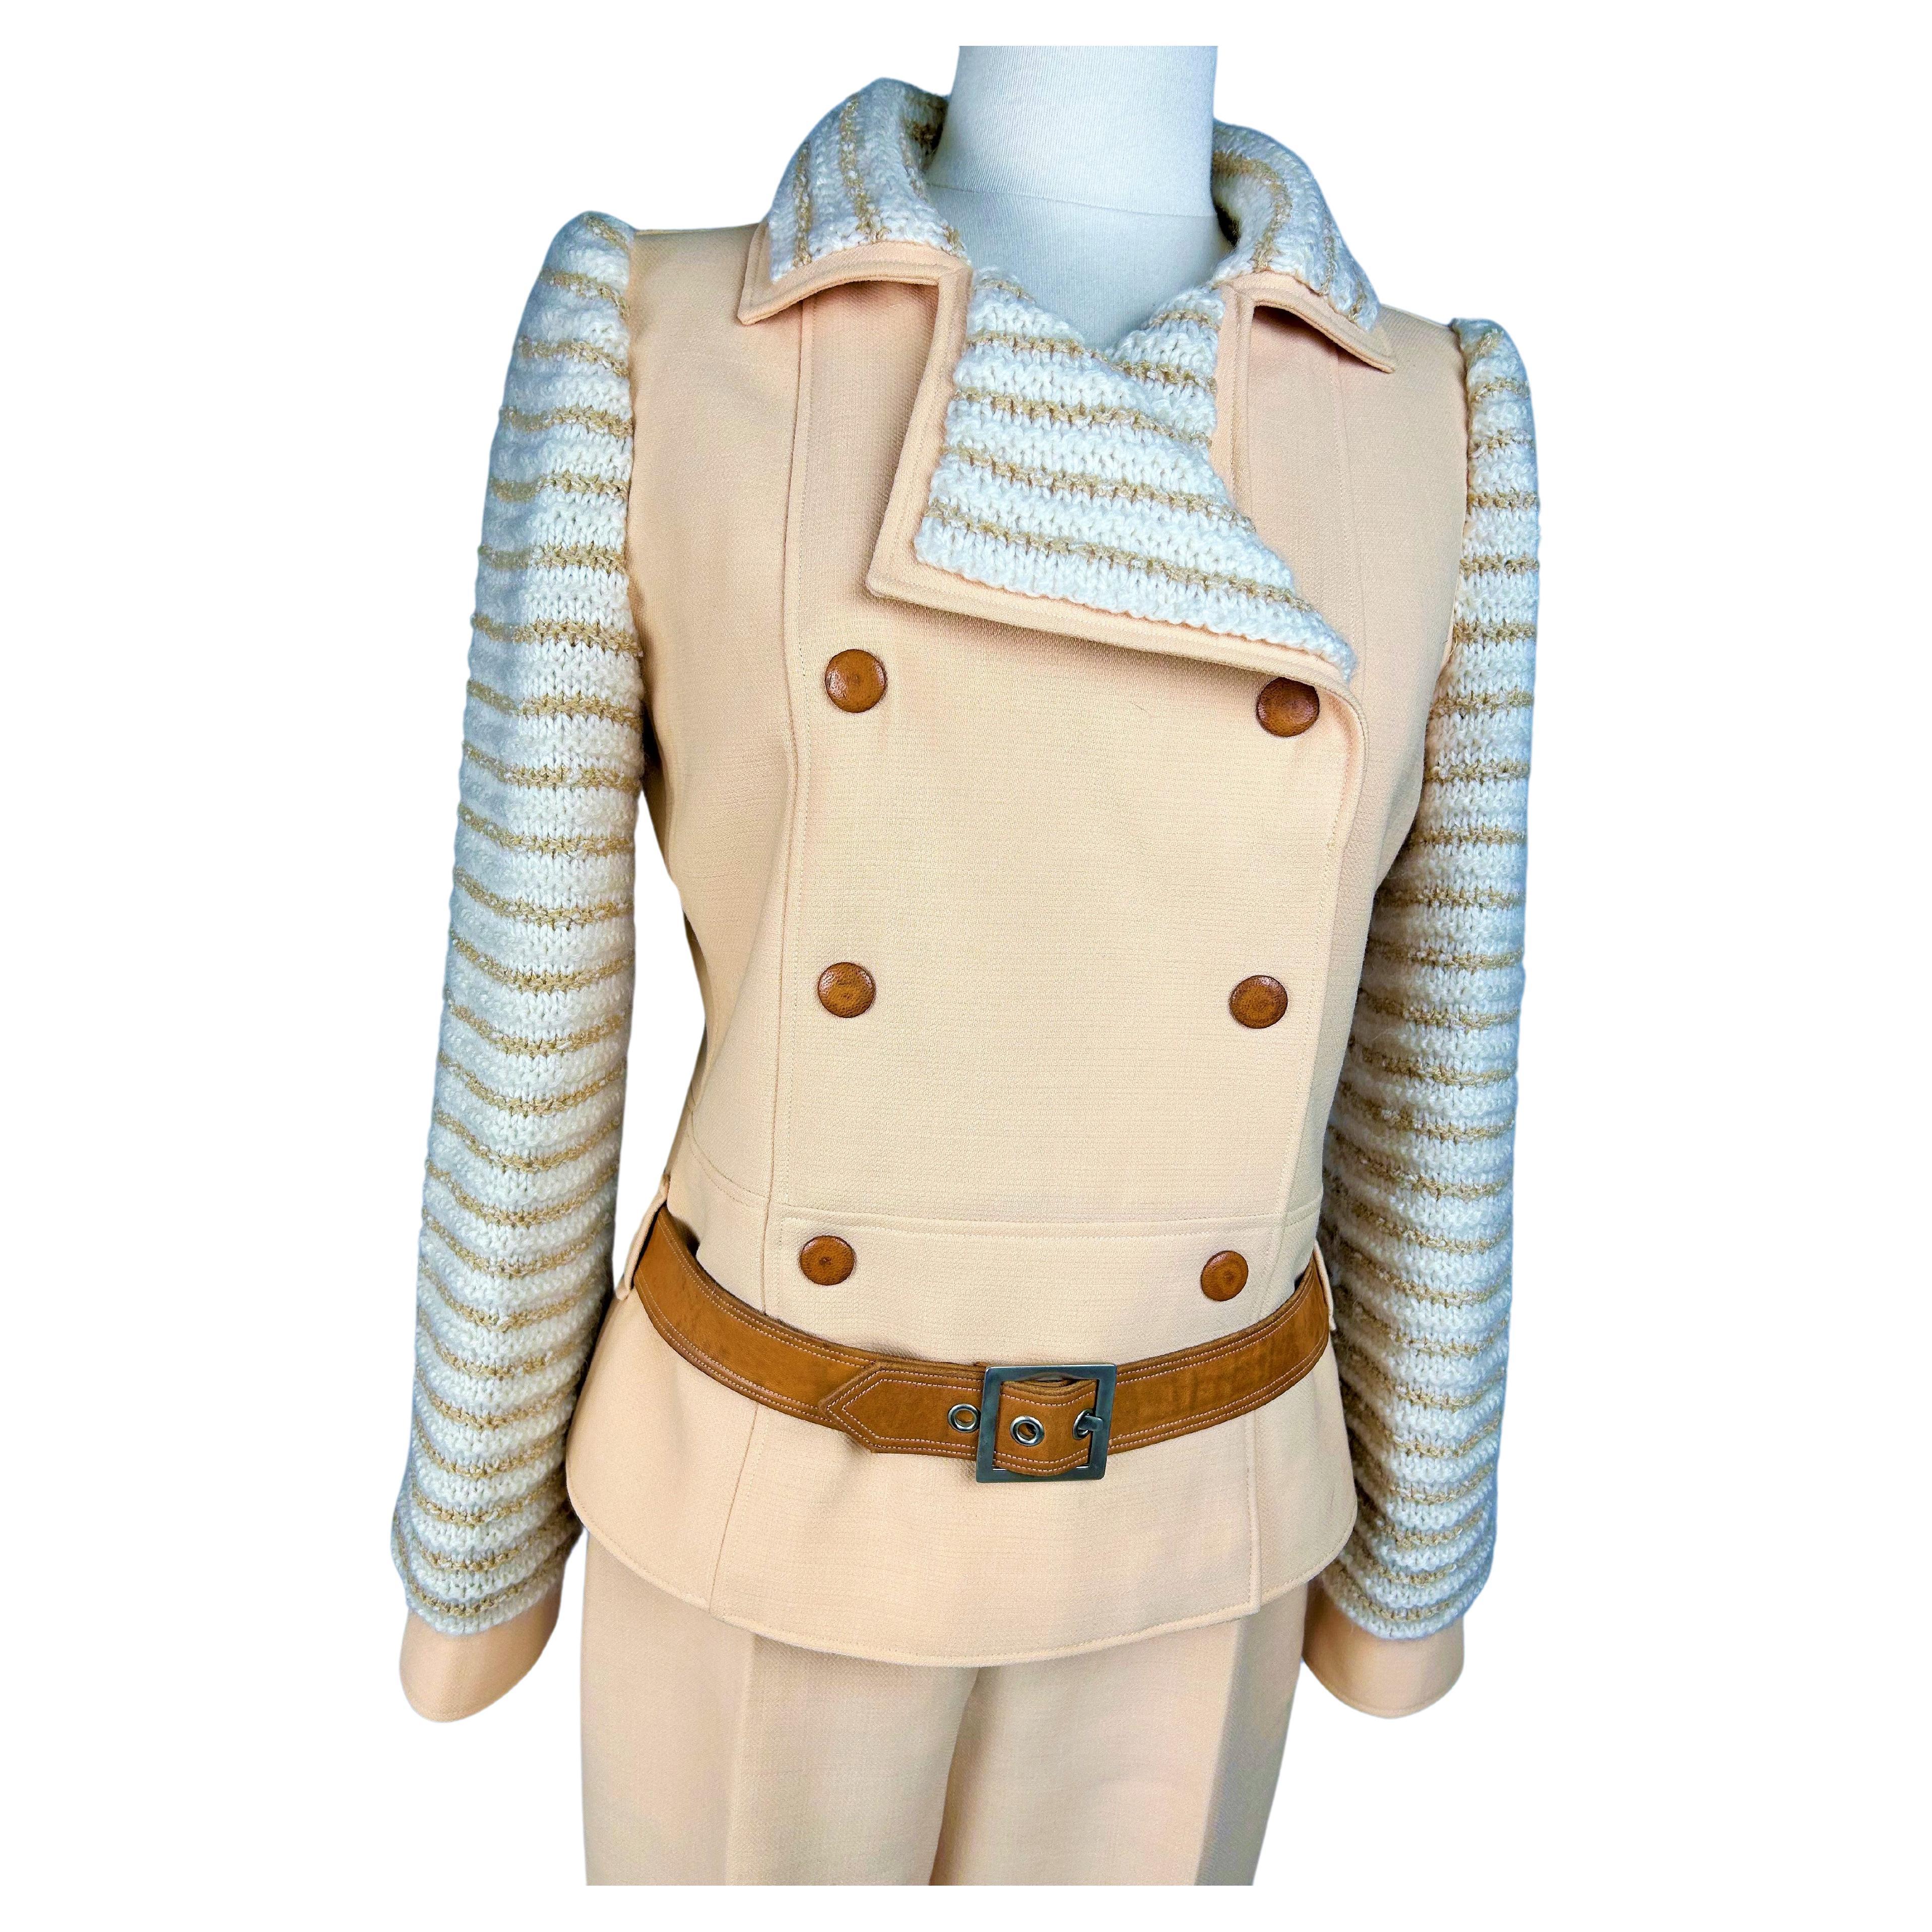 Circa 1975

France

Cream brushed jersey trouser suit by André Courrèges Couture Future numbered 046282 and 045768 and dating from the 1970s. Fitted jacket with crossed panels and six press studs sheathed in fawn-coloured leather with cuffs. Collar